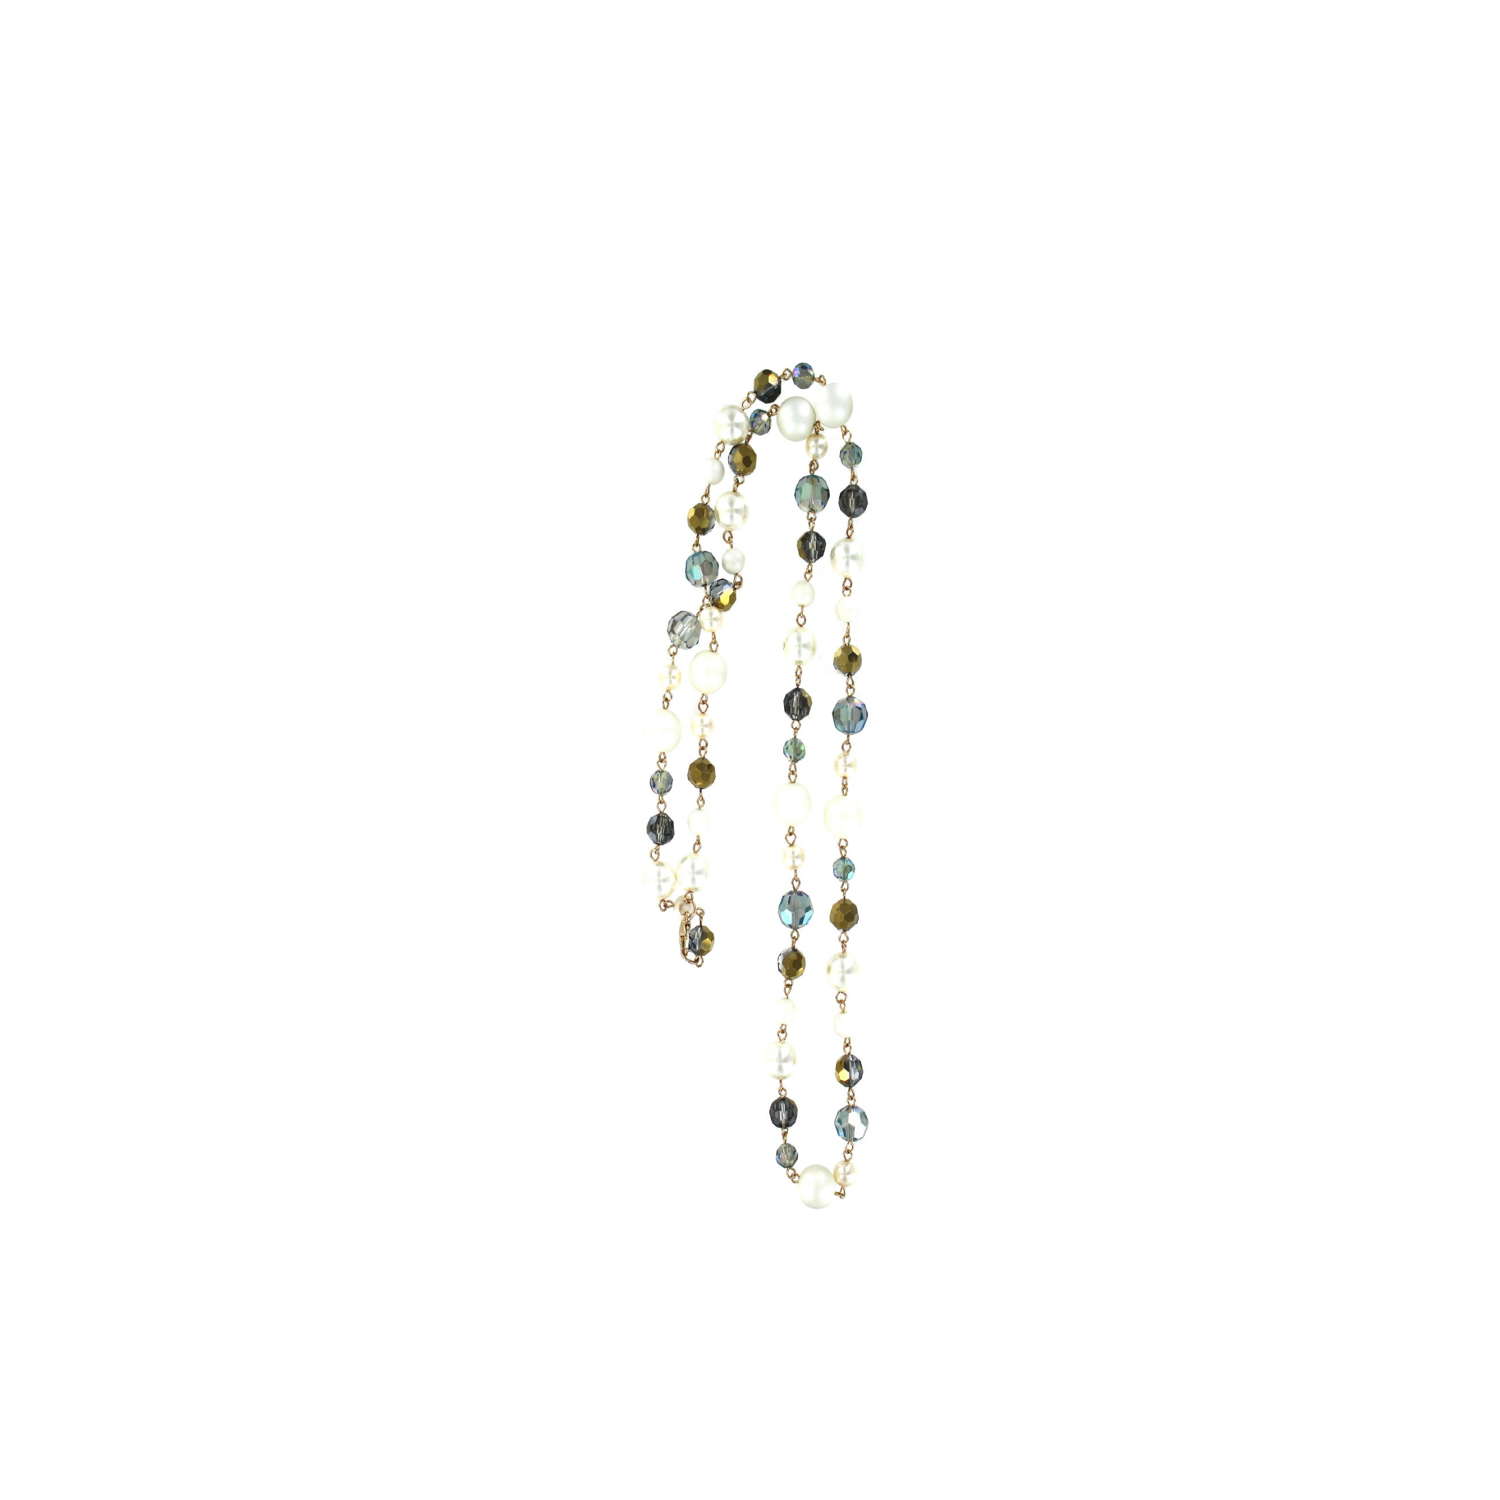 Long mixed bead necklace.